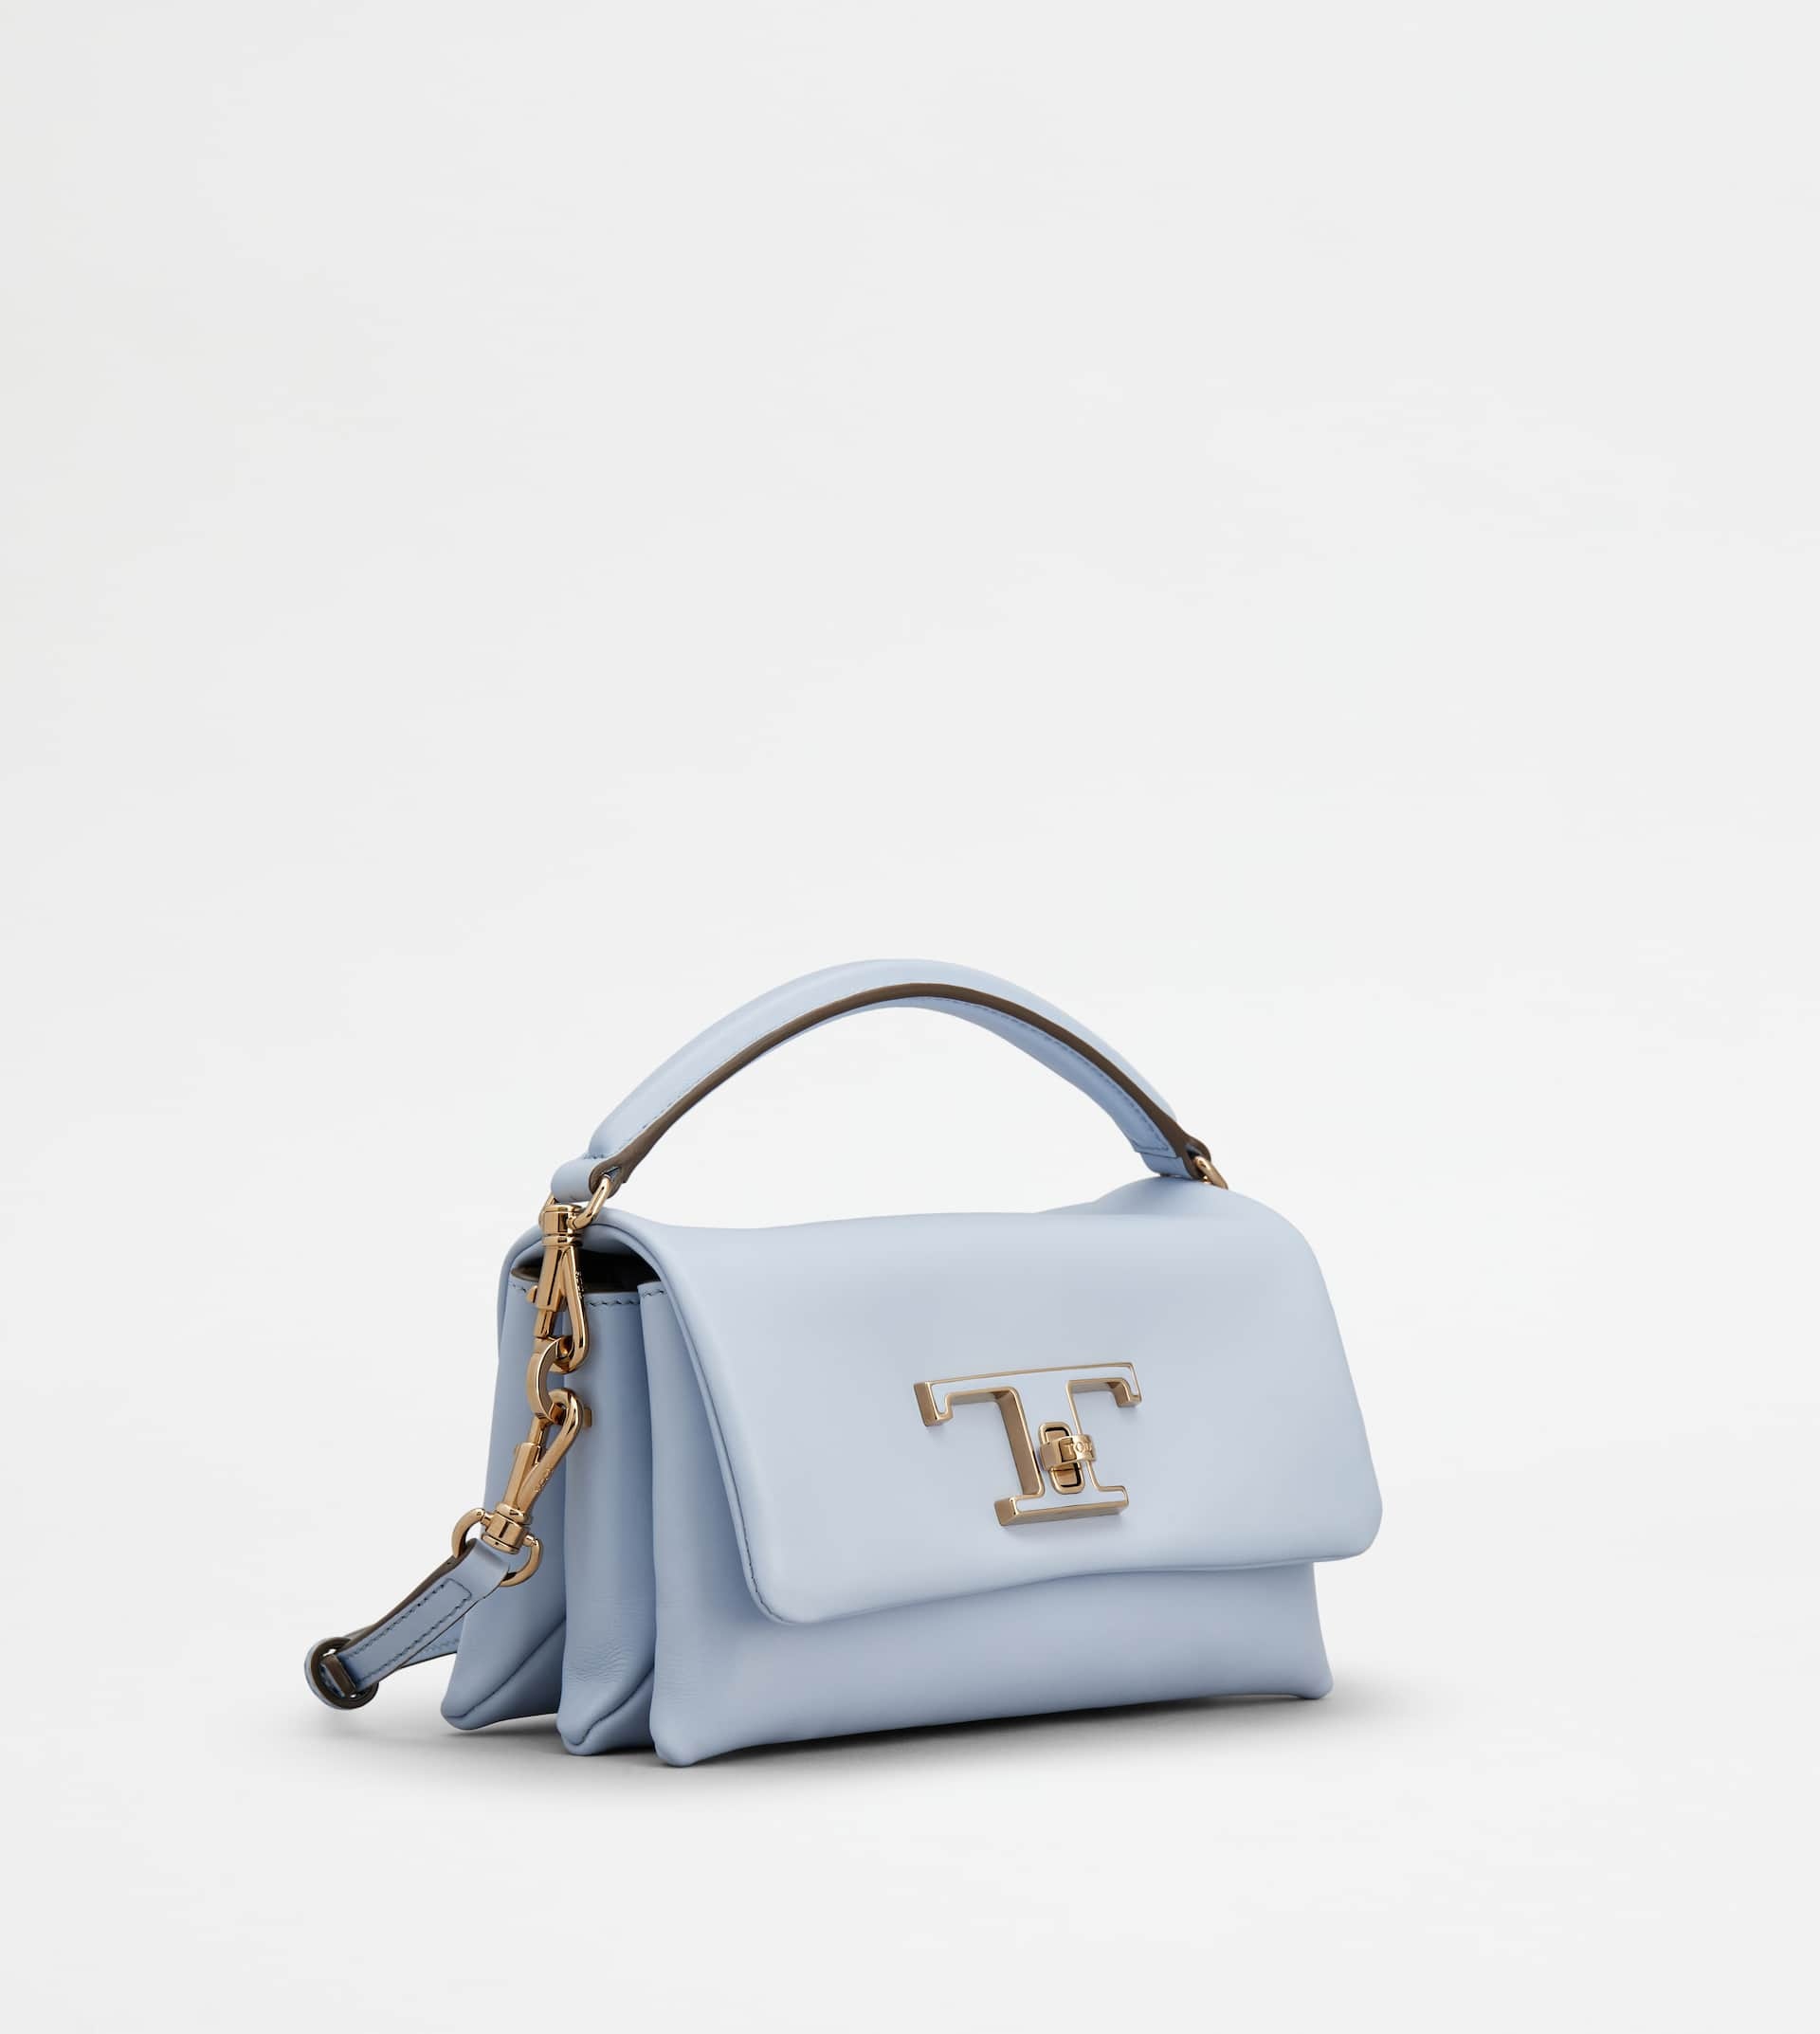 T TIMELESS FLAP BAG IN LEATHER MICRO - LIGHT BLUE - 3